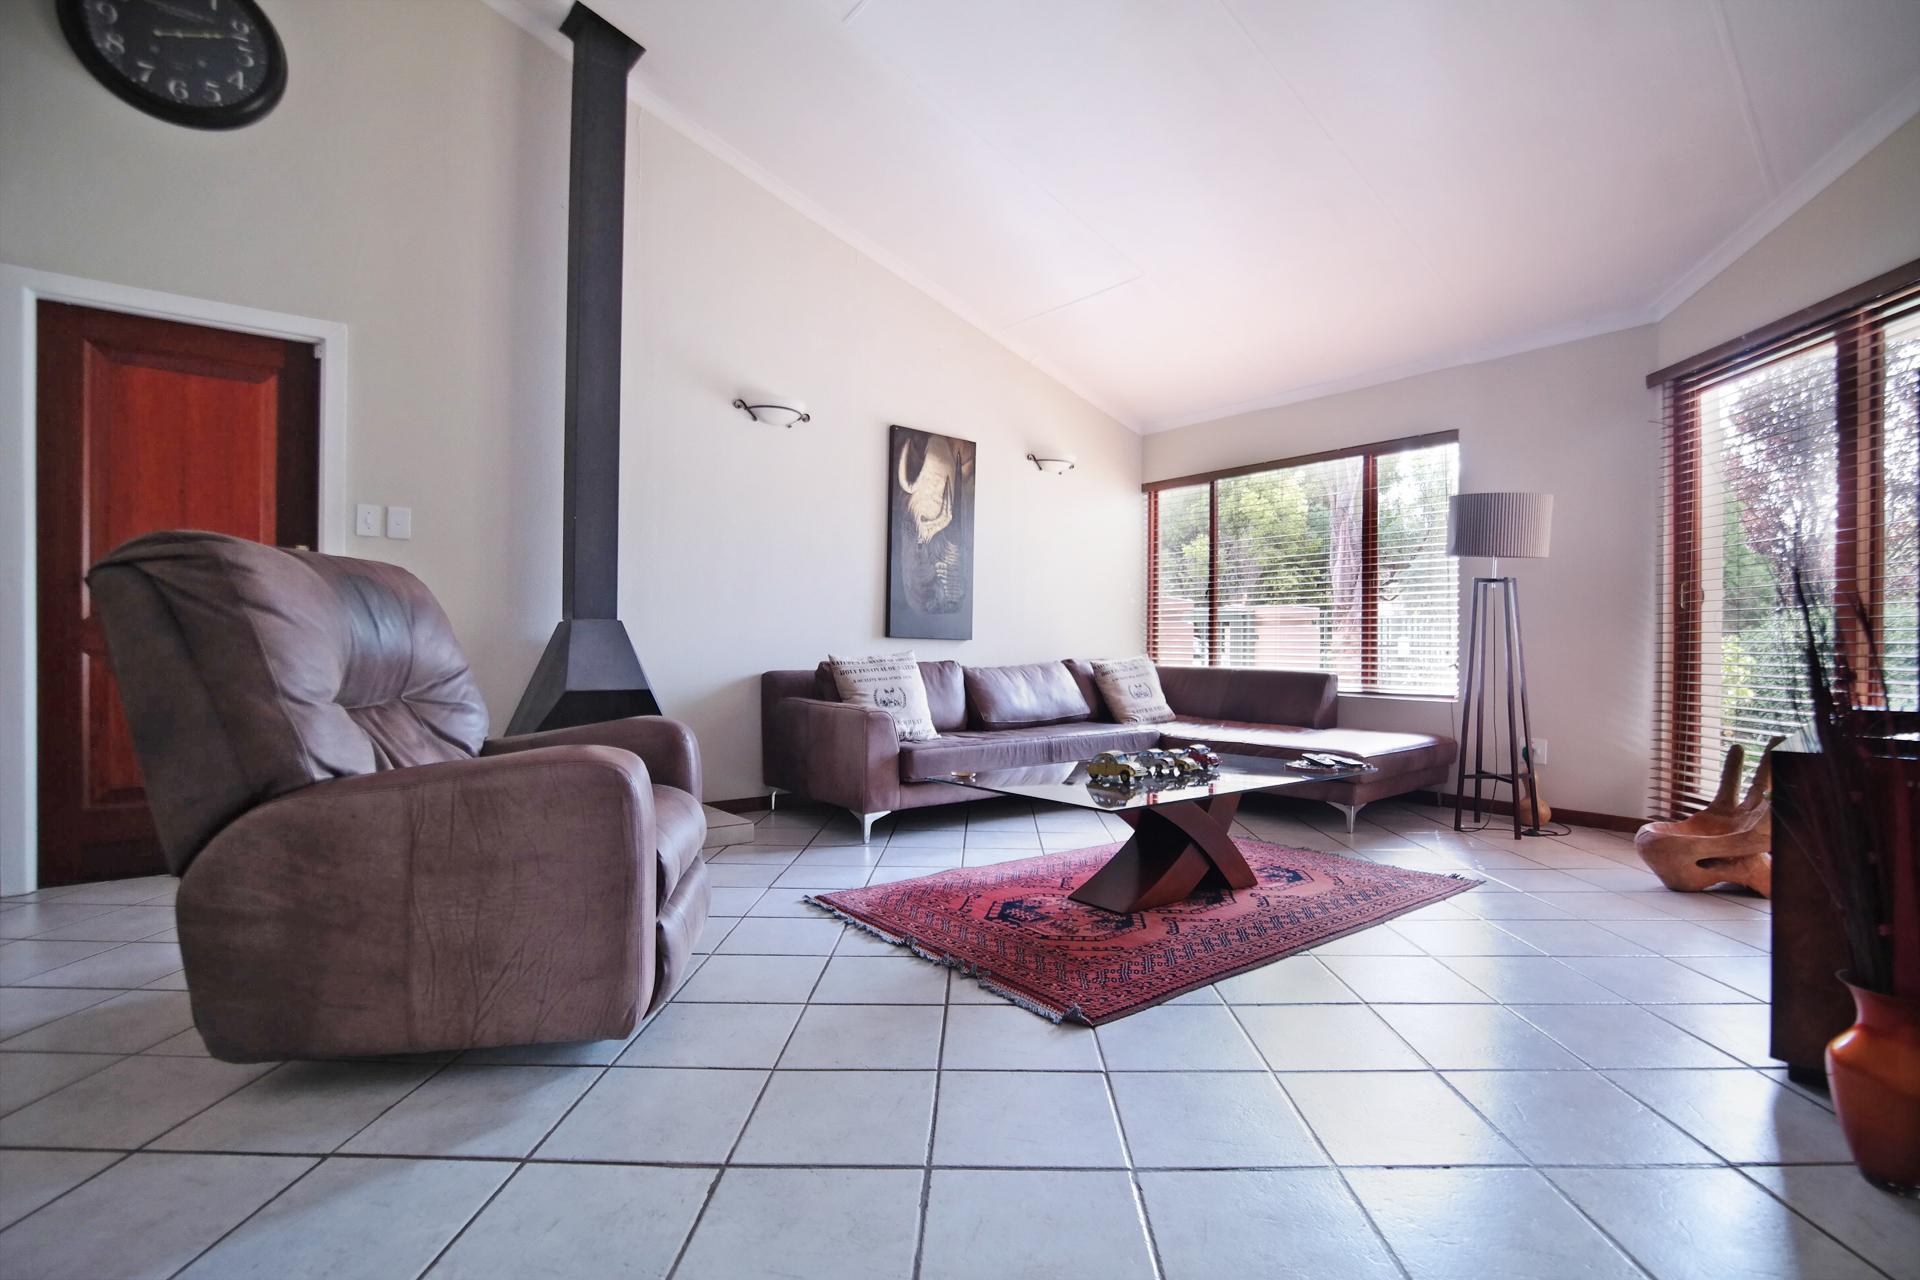 TV Room - 19 square meters of property in Silver Lakes Golf Estate